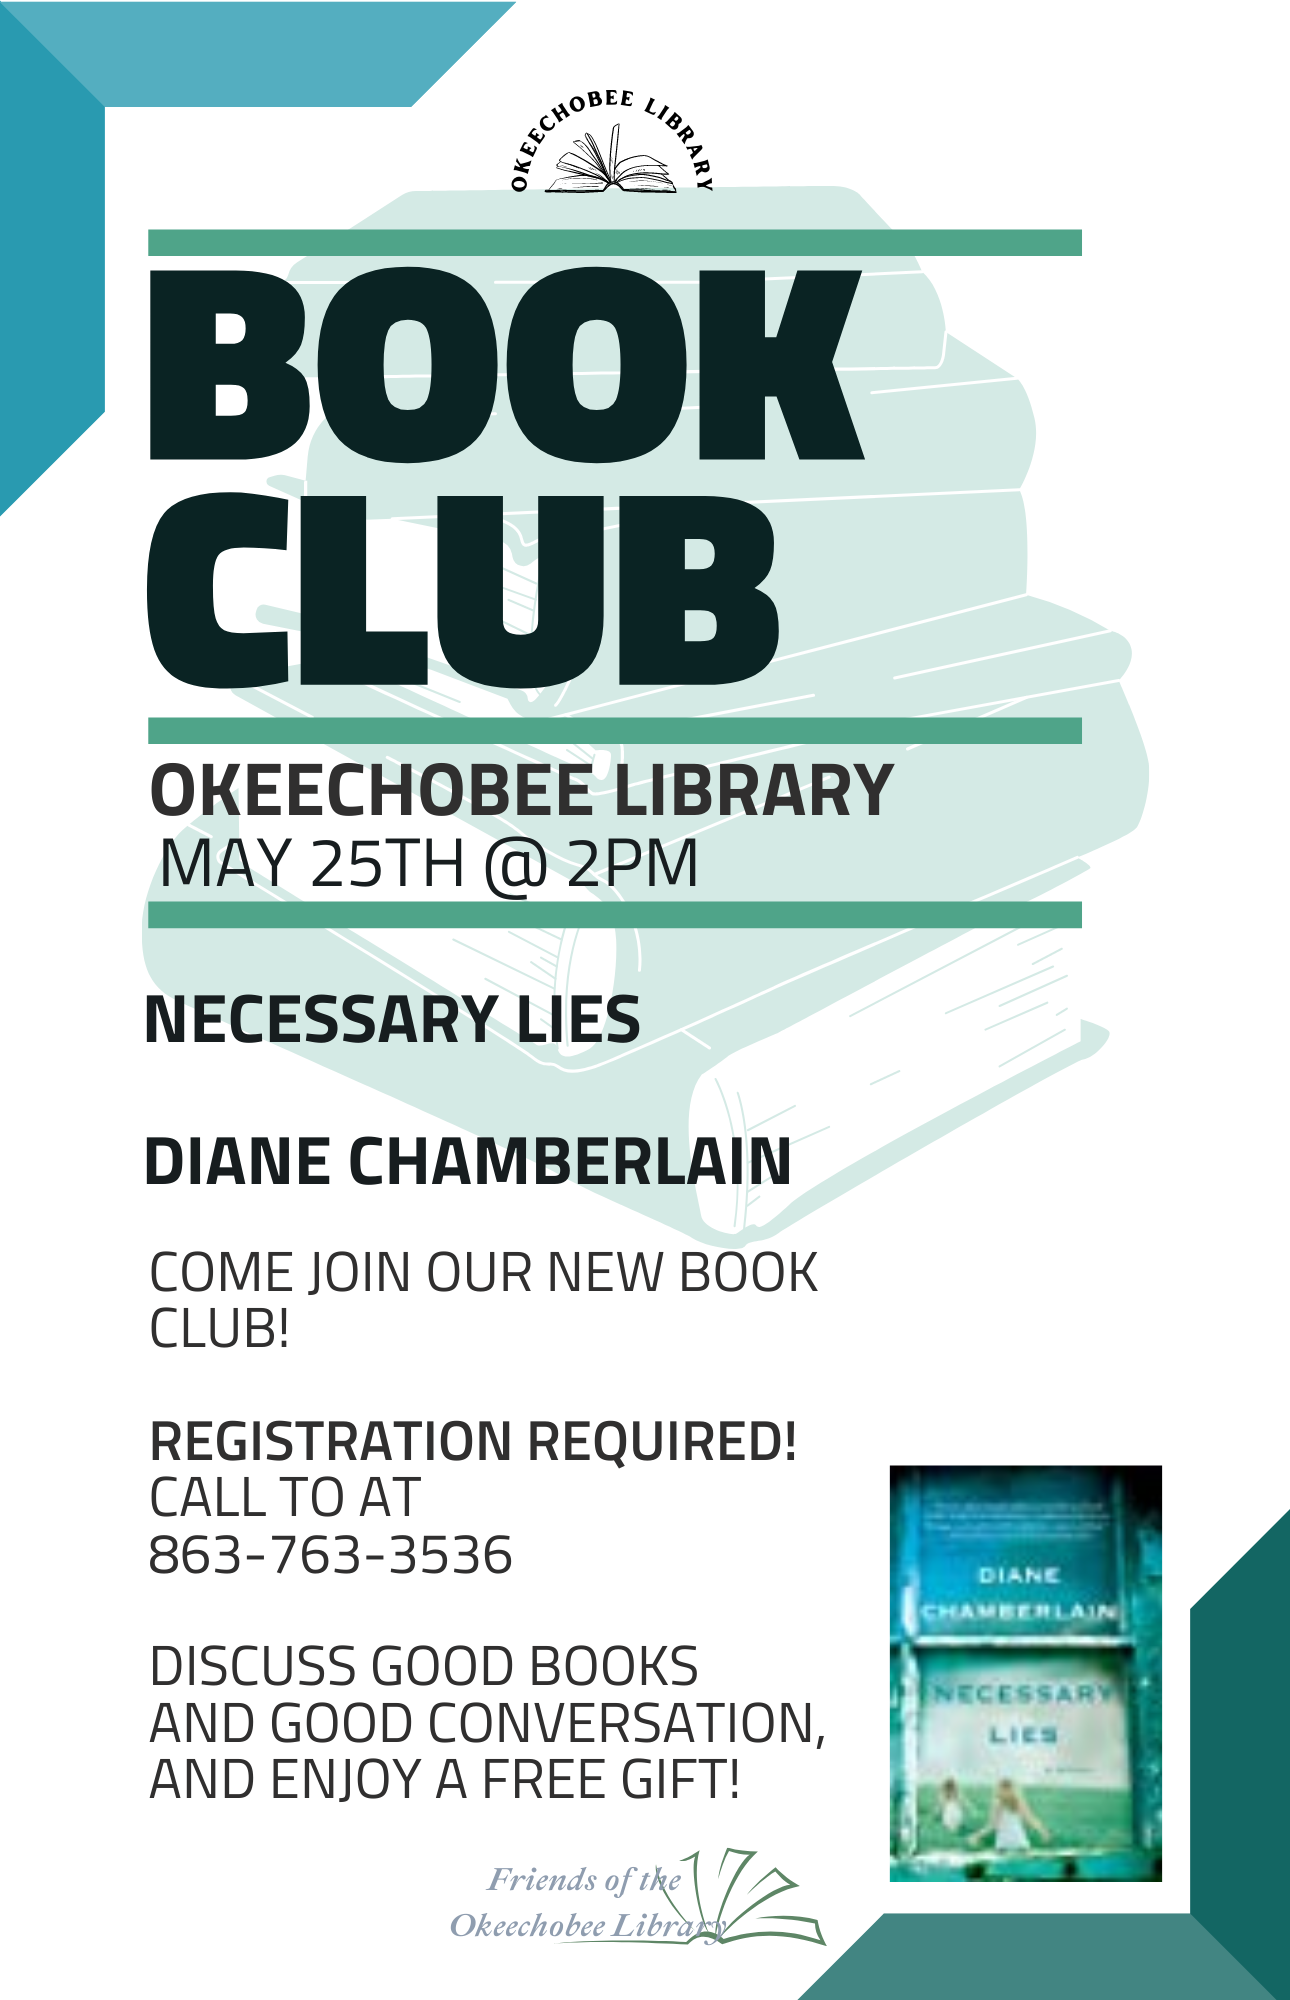 Join us at the Okeechobee Library on Thursday, May 25th at 2pm for Book Club!